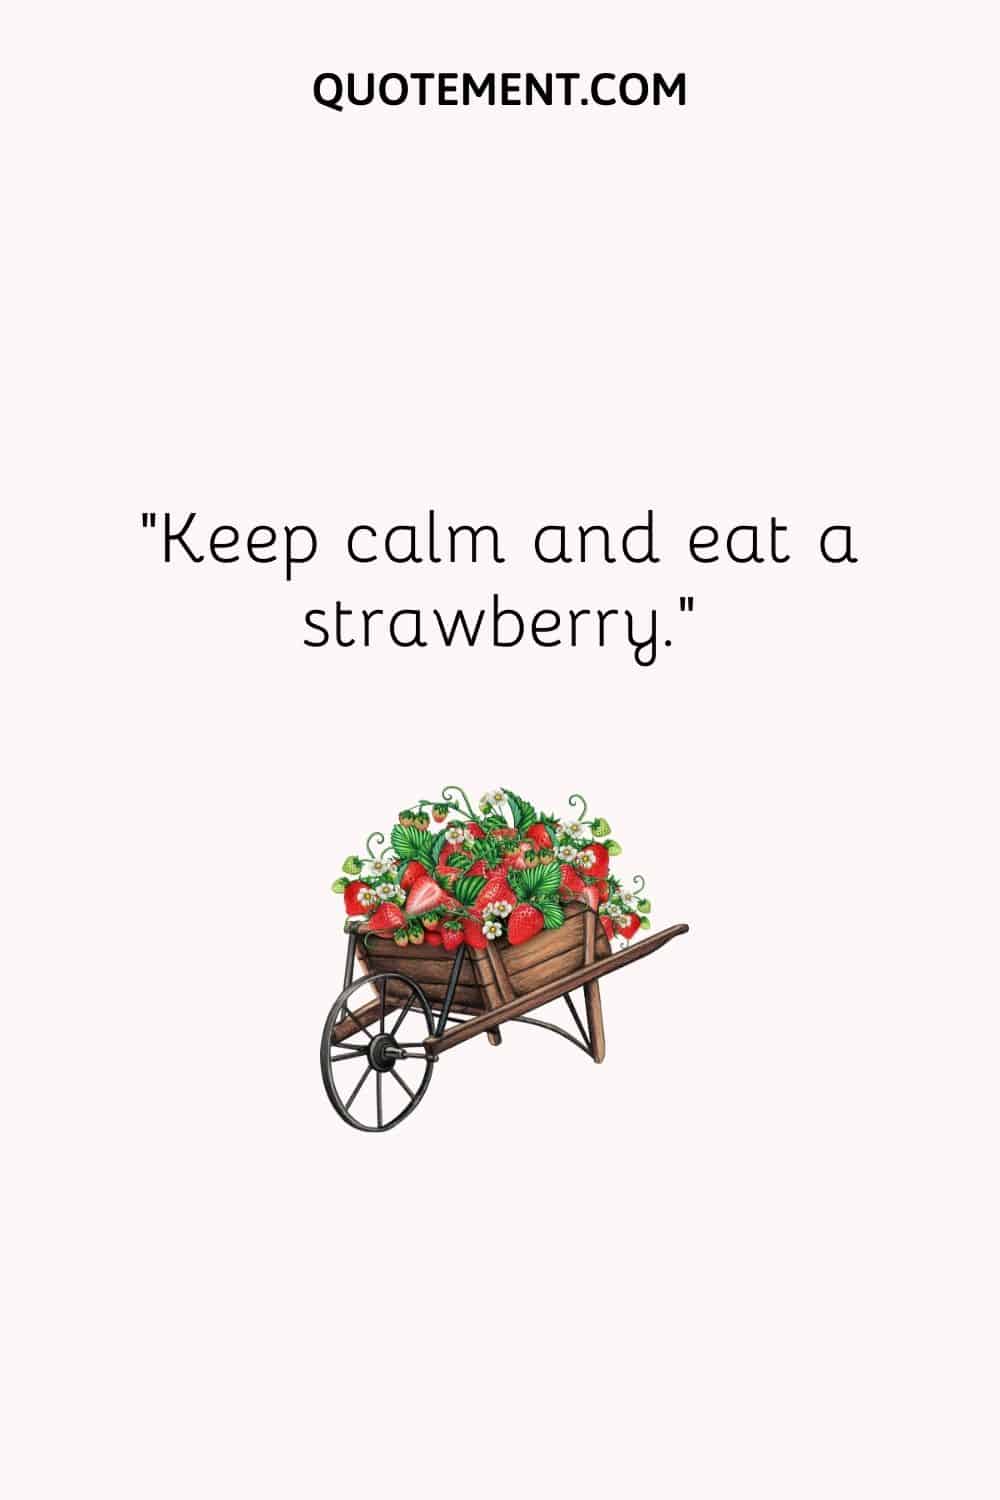 Keep calm and eat a strawberry